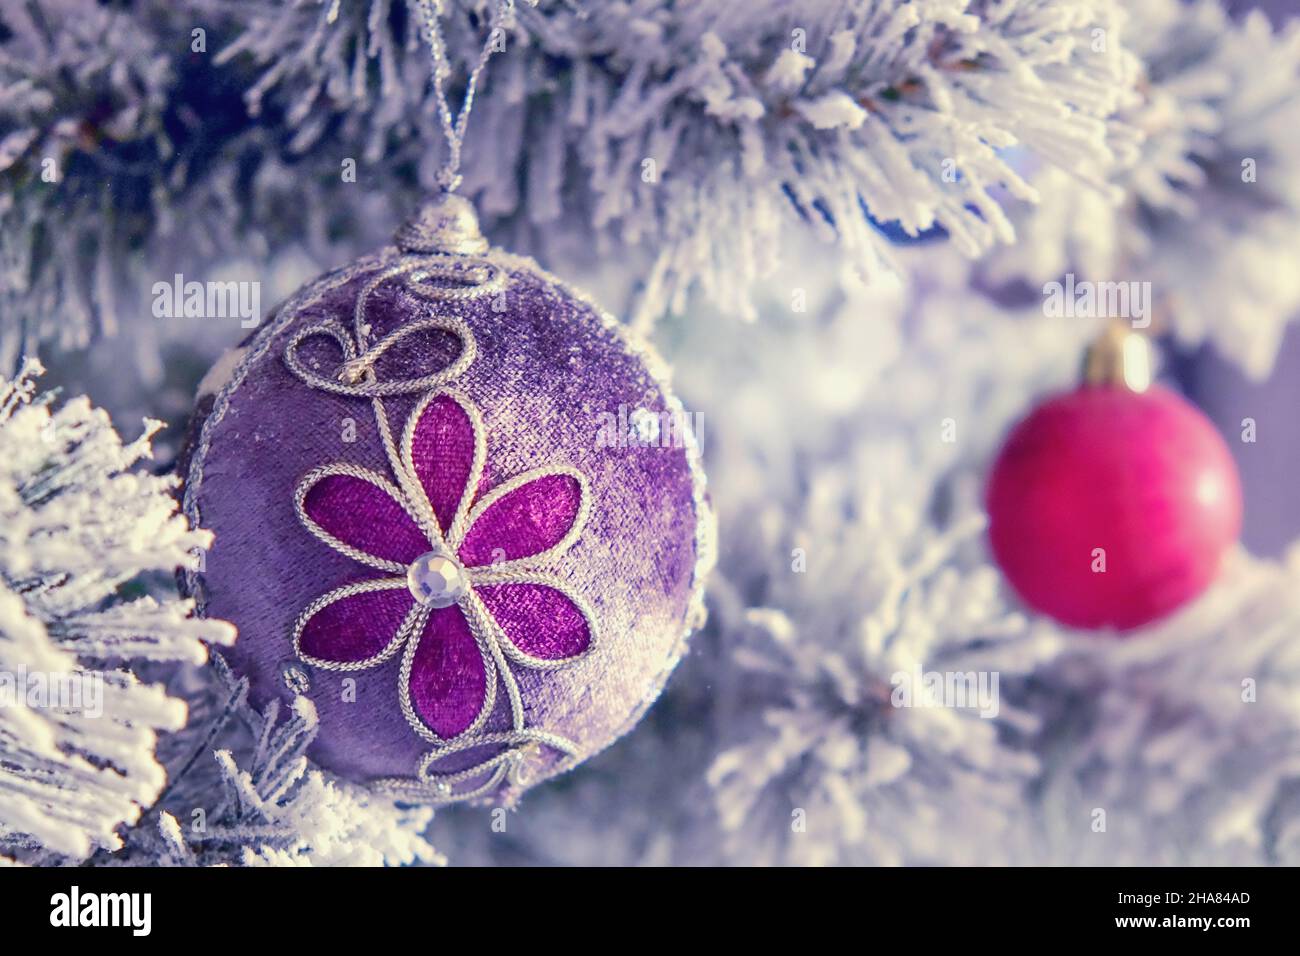 Snowy branch of christmas tree with violet gray fabric christmas ball with flower and glitter decorations close up and blurred red ball on background. Stock Photo